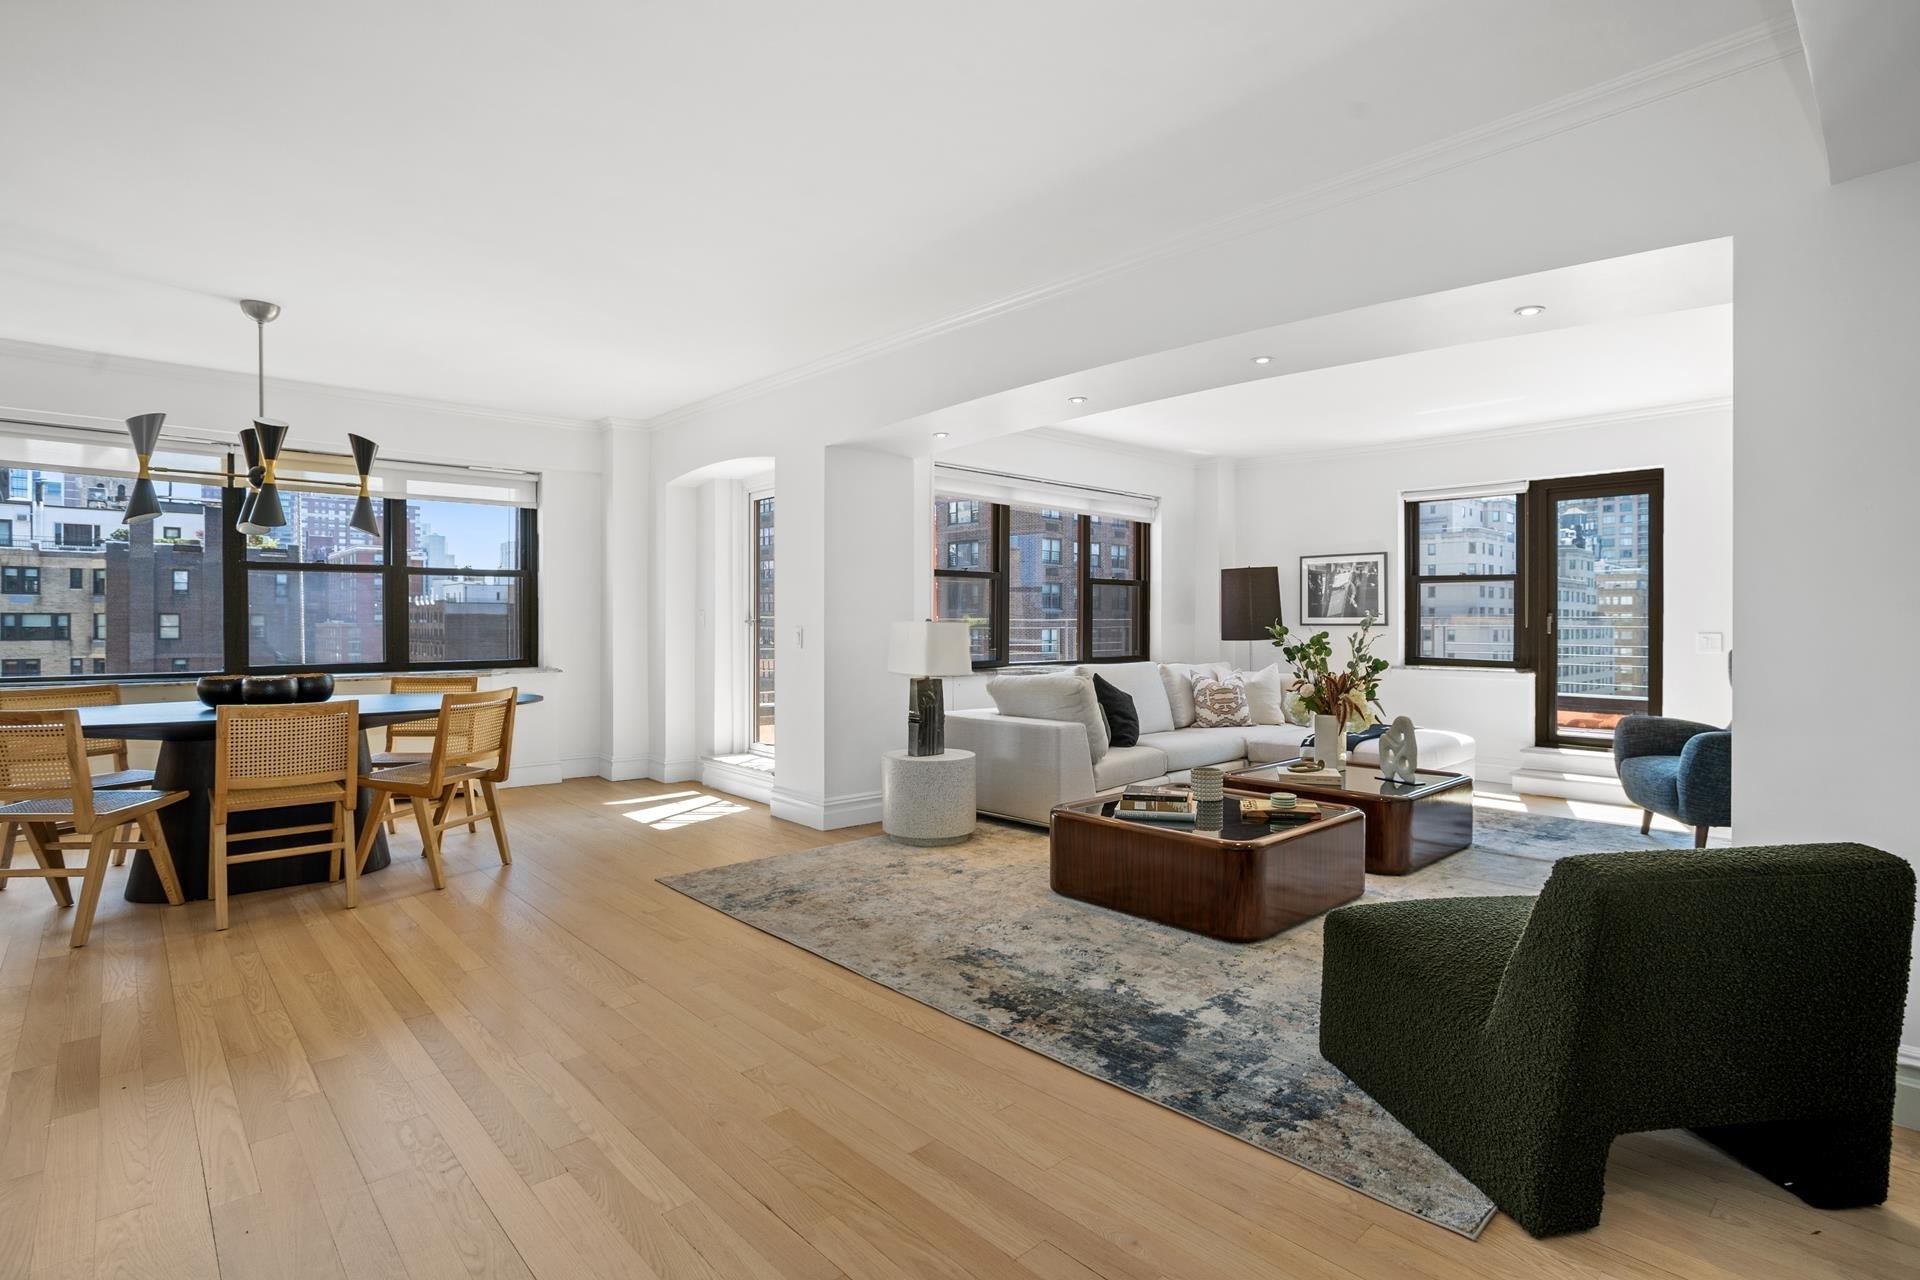 Co-op Properties for Sale at 165 E 72ND ST, 16C Lenox Hill, New York, NY 10021